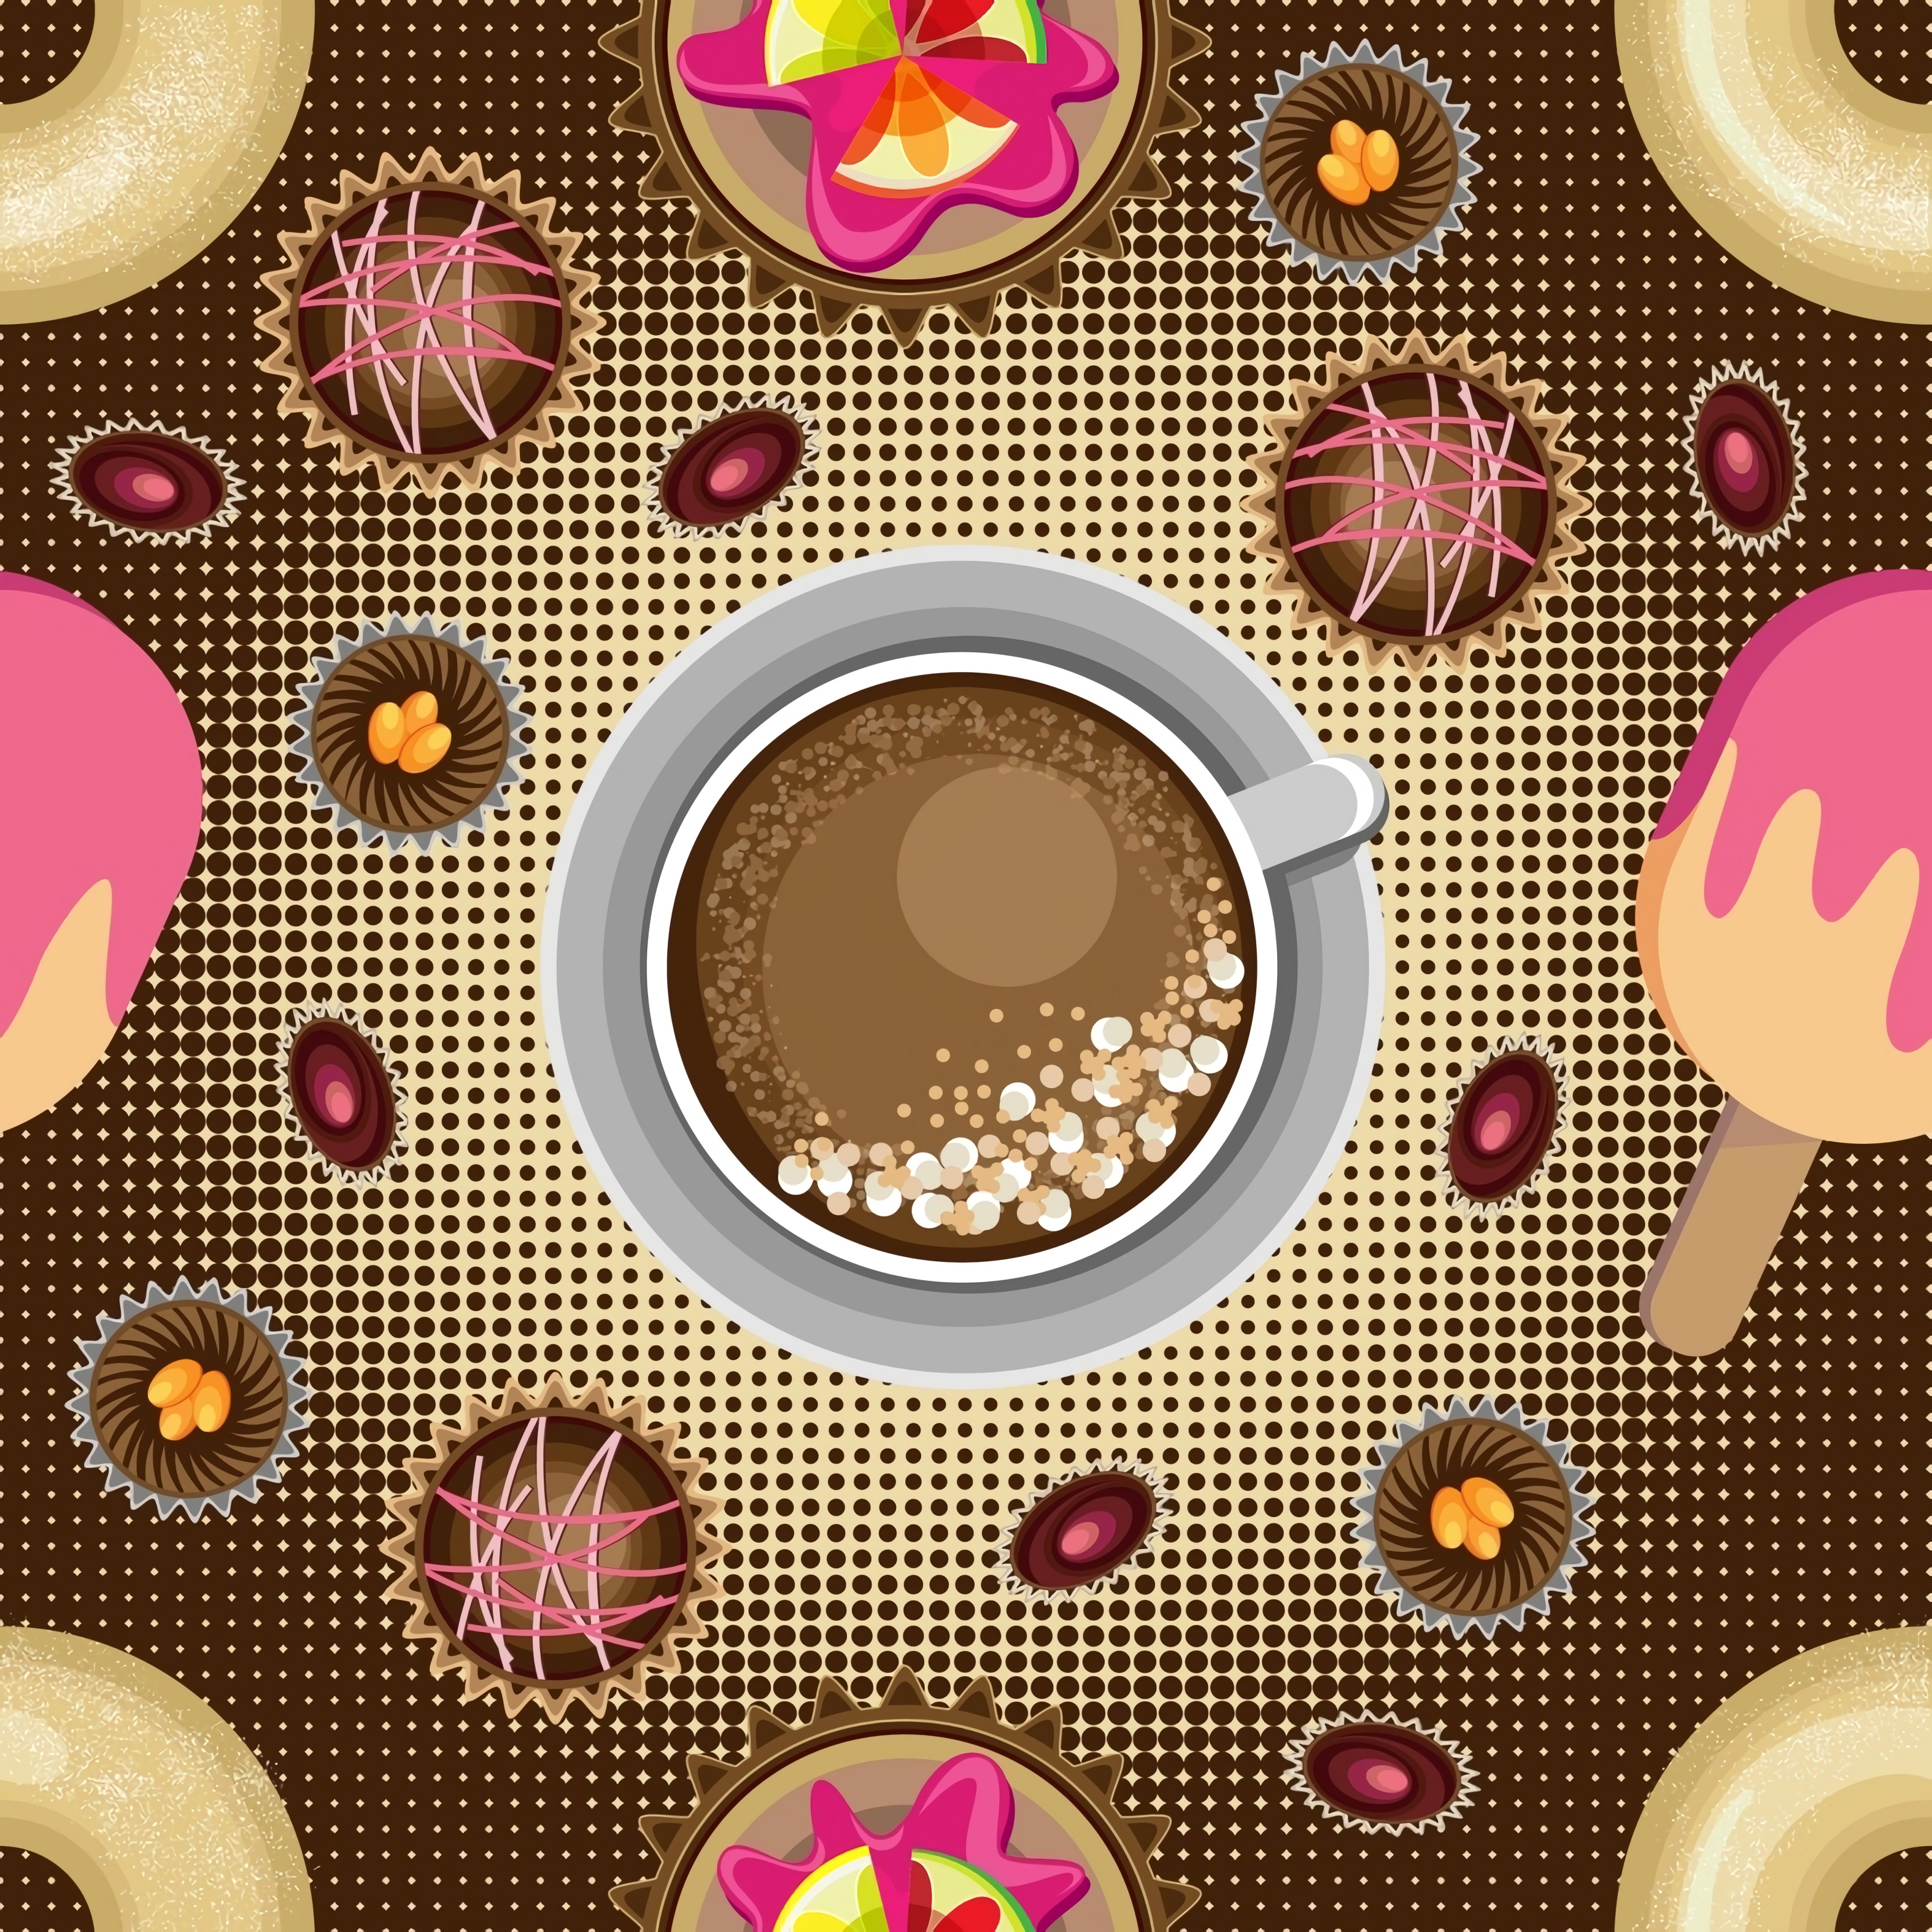 87933 download wallpaper art, desert, candies, cup, cappuccino screensavers and pictures for free